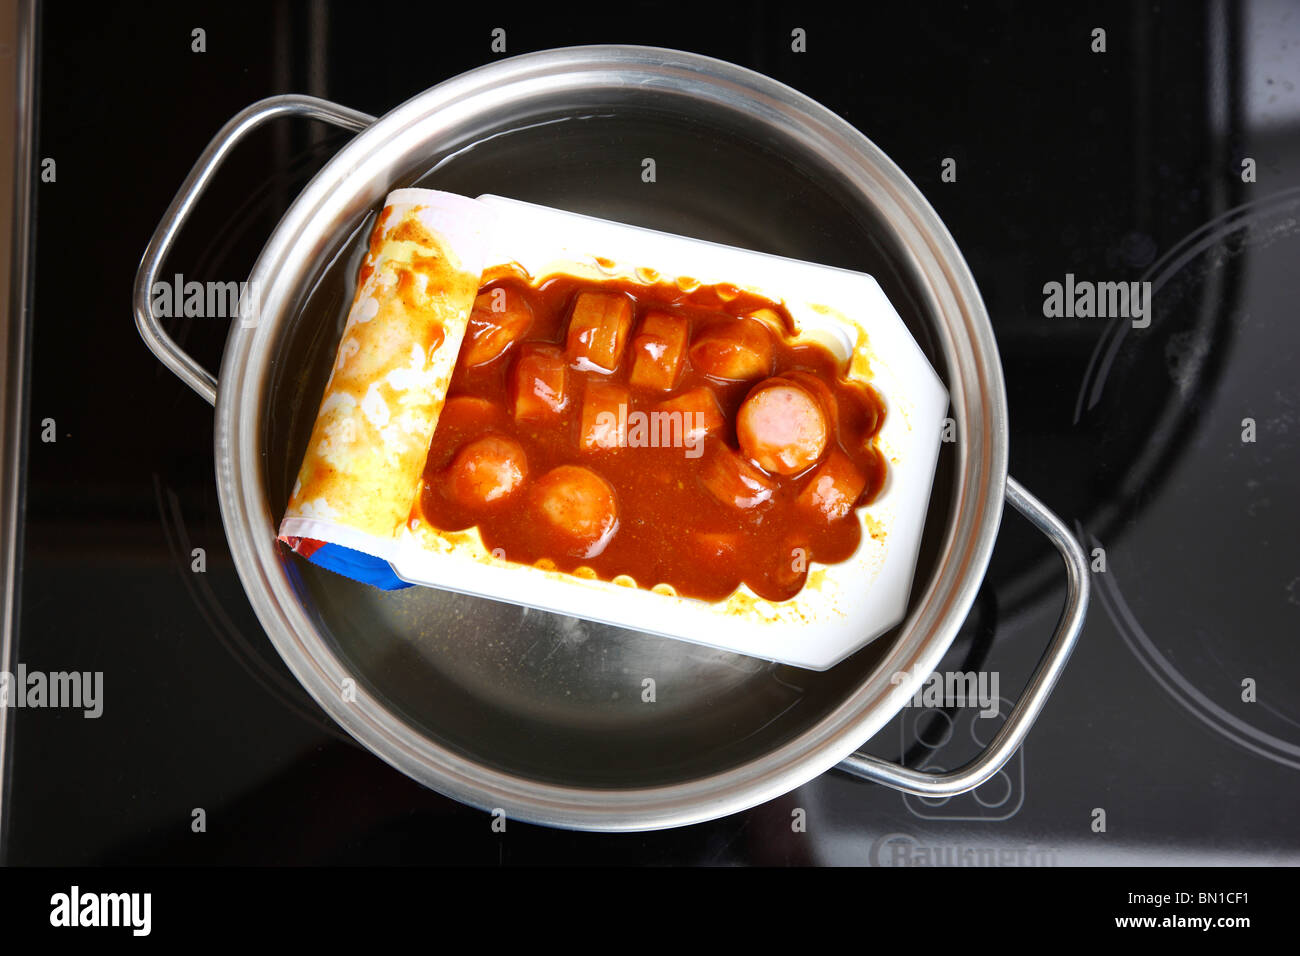 Heating of ready-to-serve meals in hot water. Soups or pasta dishes in cans. Convenience food products. Sausage in tomato sauce. Stock Photo